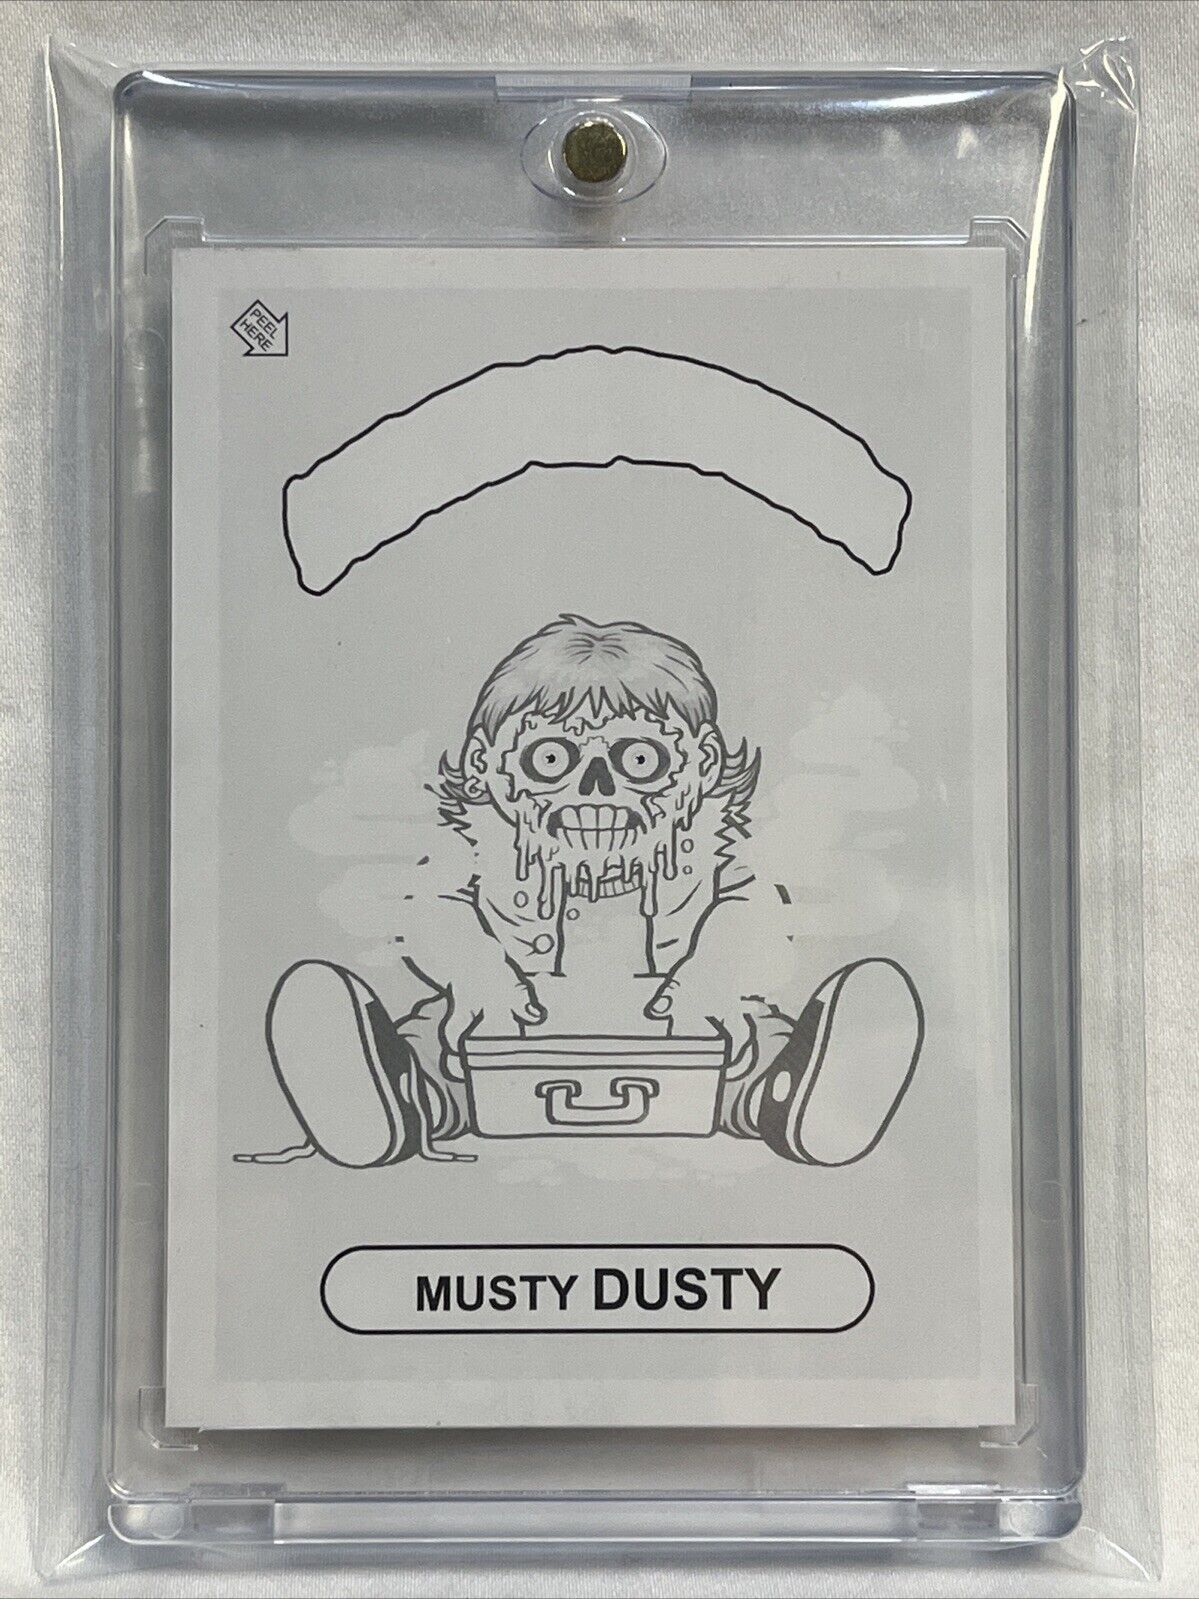 Rare 2018 SSFC Lunch Box Leftovers Series 1 Musty Dusty #1b B/W in Hard Case